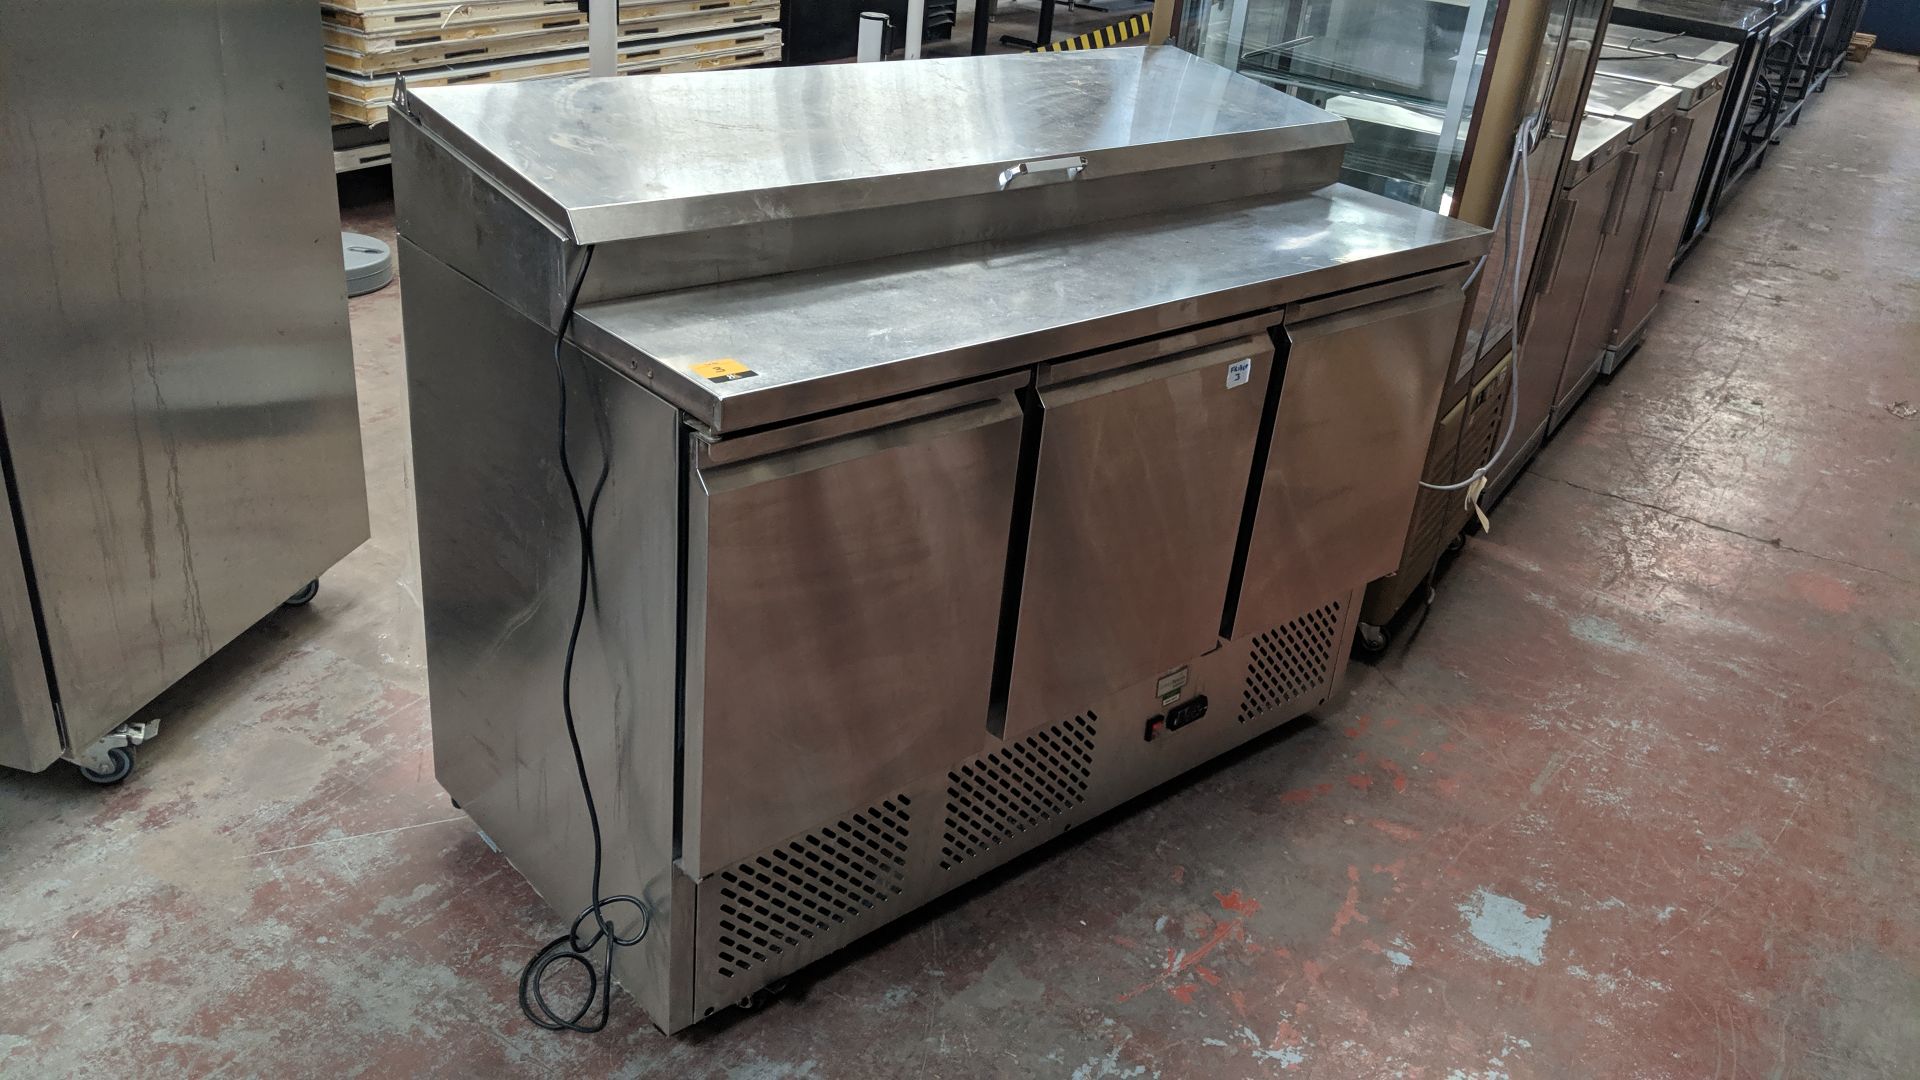 Interlevin stainless steel refrigerated triple door prep counter with hinged lid access salad